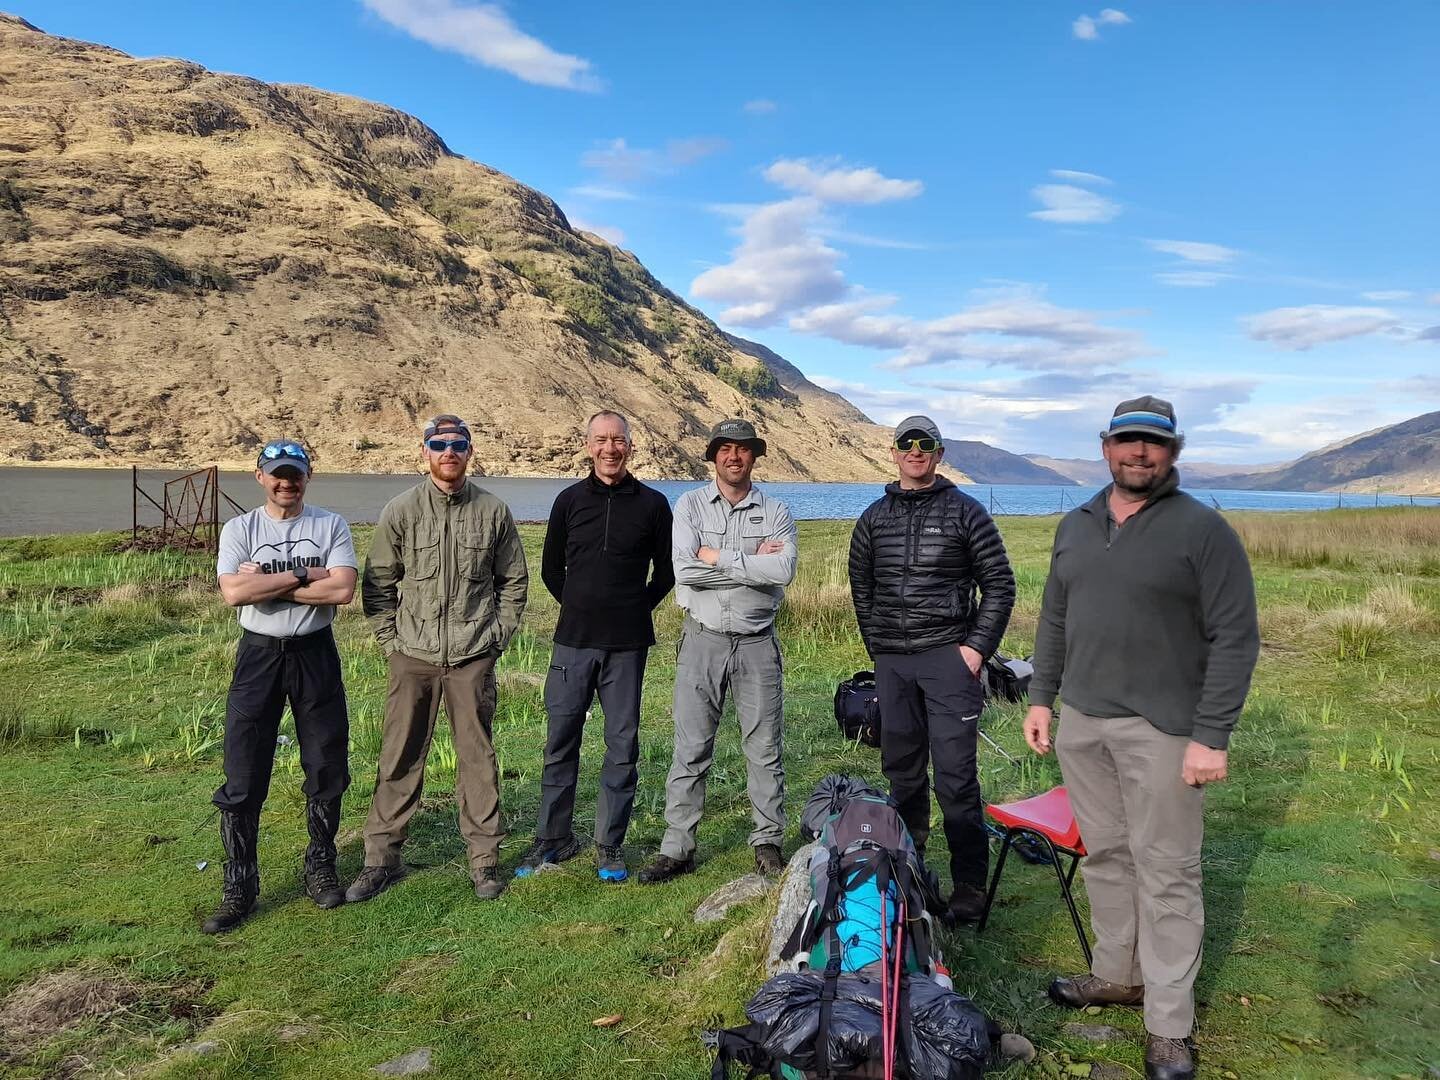 Our #knoydart trekking team have been lucky and missed the rain! This was a fantastic wilderness trek off the beaten track with some beautiful scenery and wildlife.